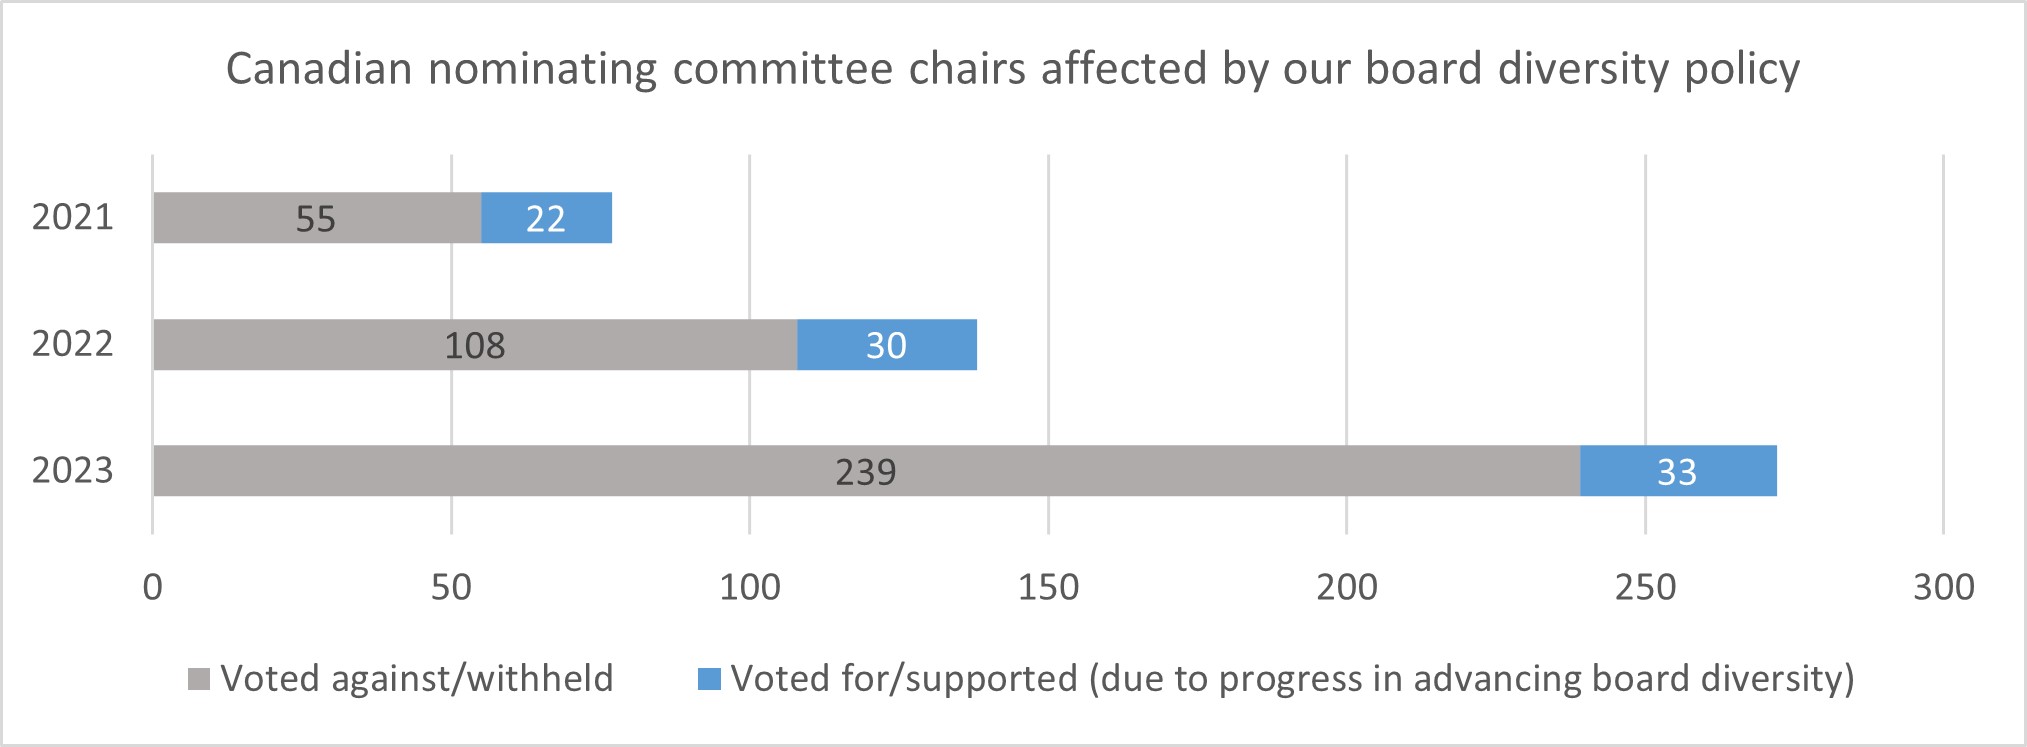 In 2023, in Canada, we withheld support from 239 chairs of nominating committee owing to inadequate boards diversity. We also voted in favour of 33 of the 108 chairs of nominating committee against whom we had voted in 2022 owing to our board diversity policy, showcasing progress since that year.